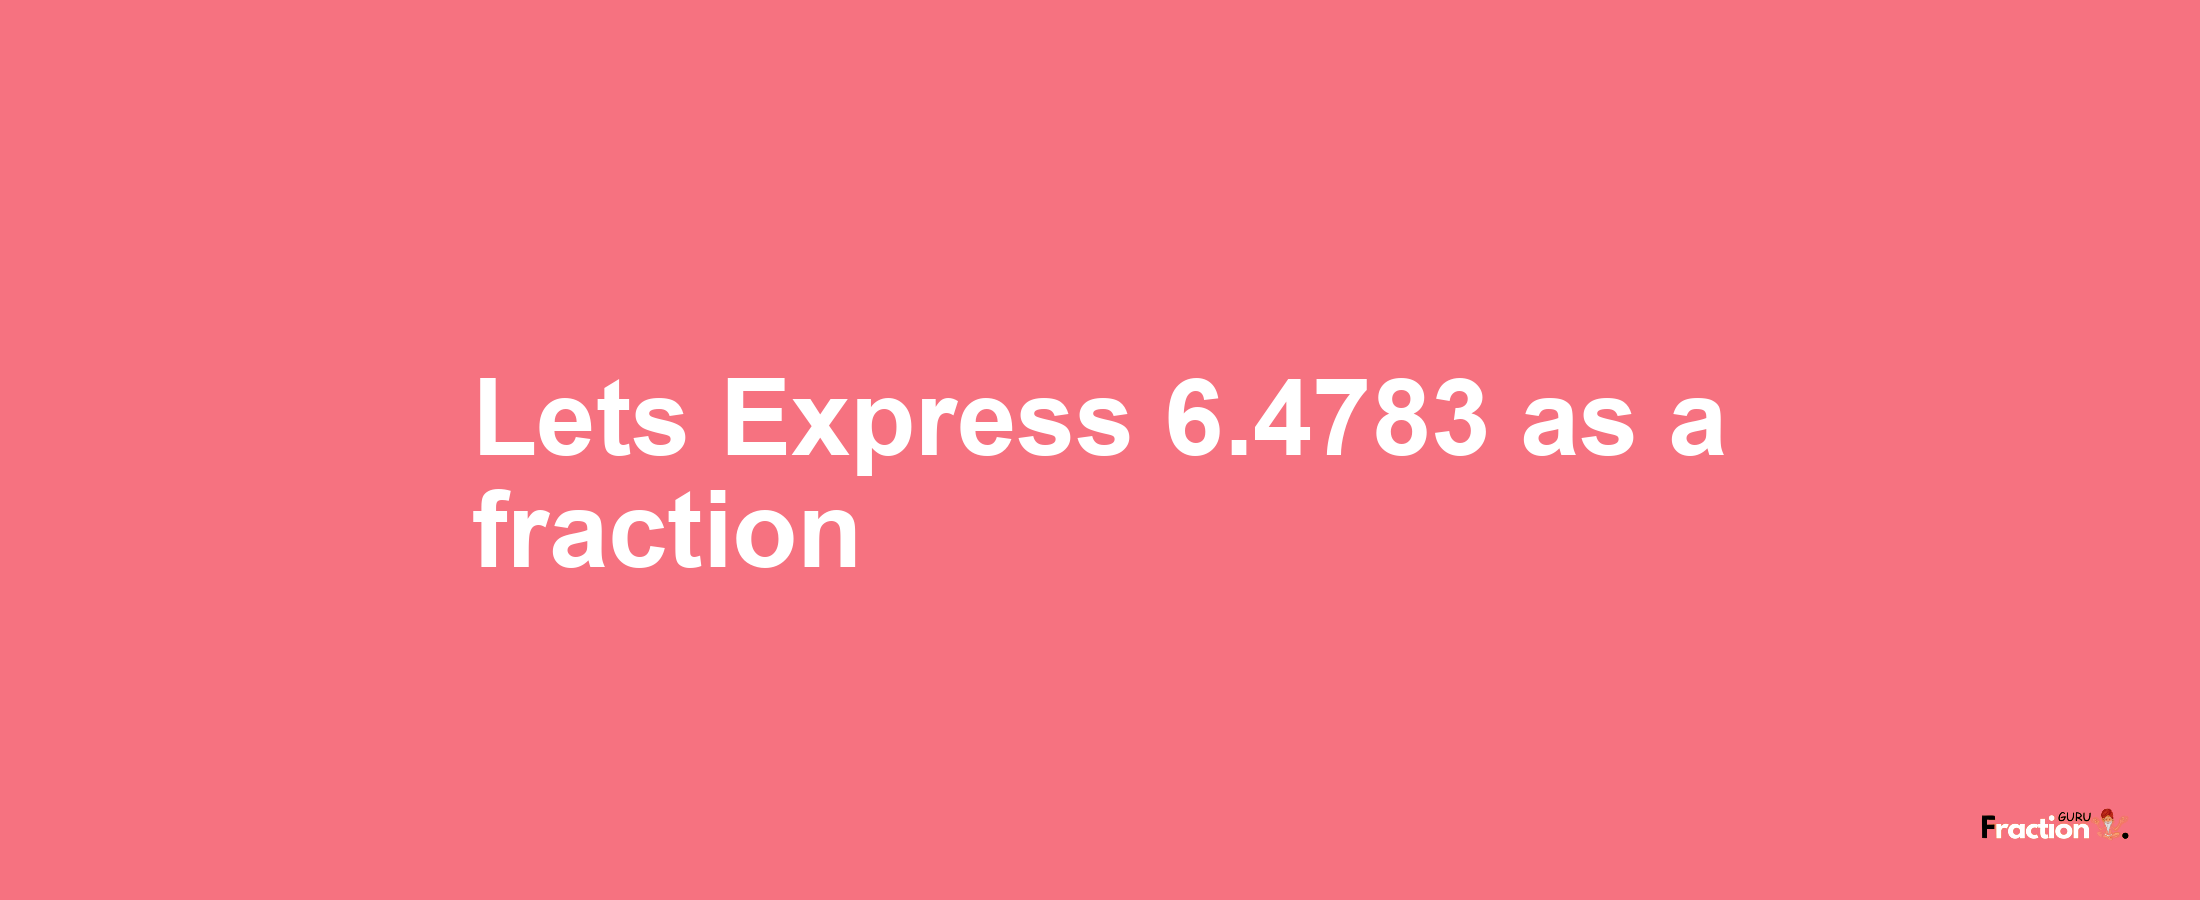 Lets Express 6.4783 as afraction